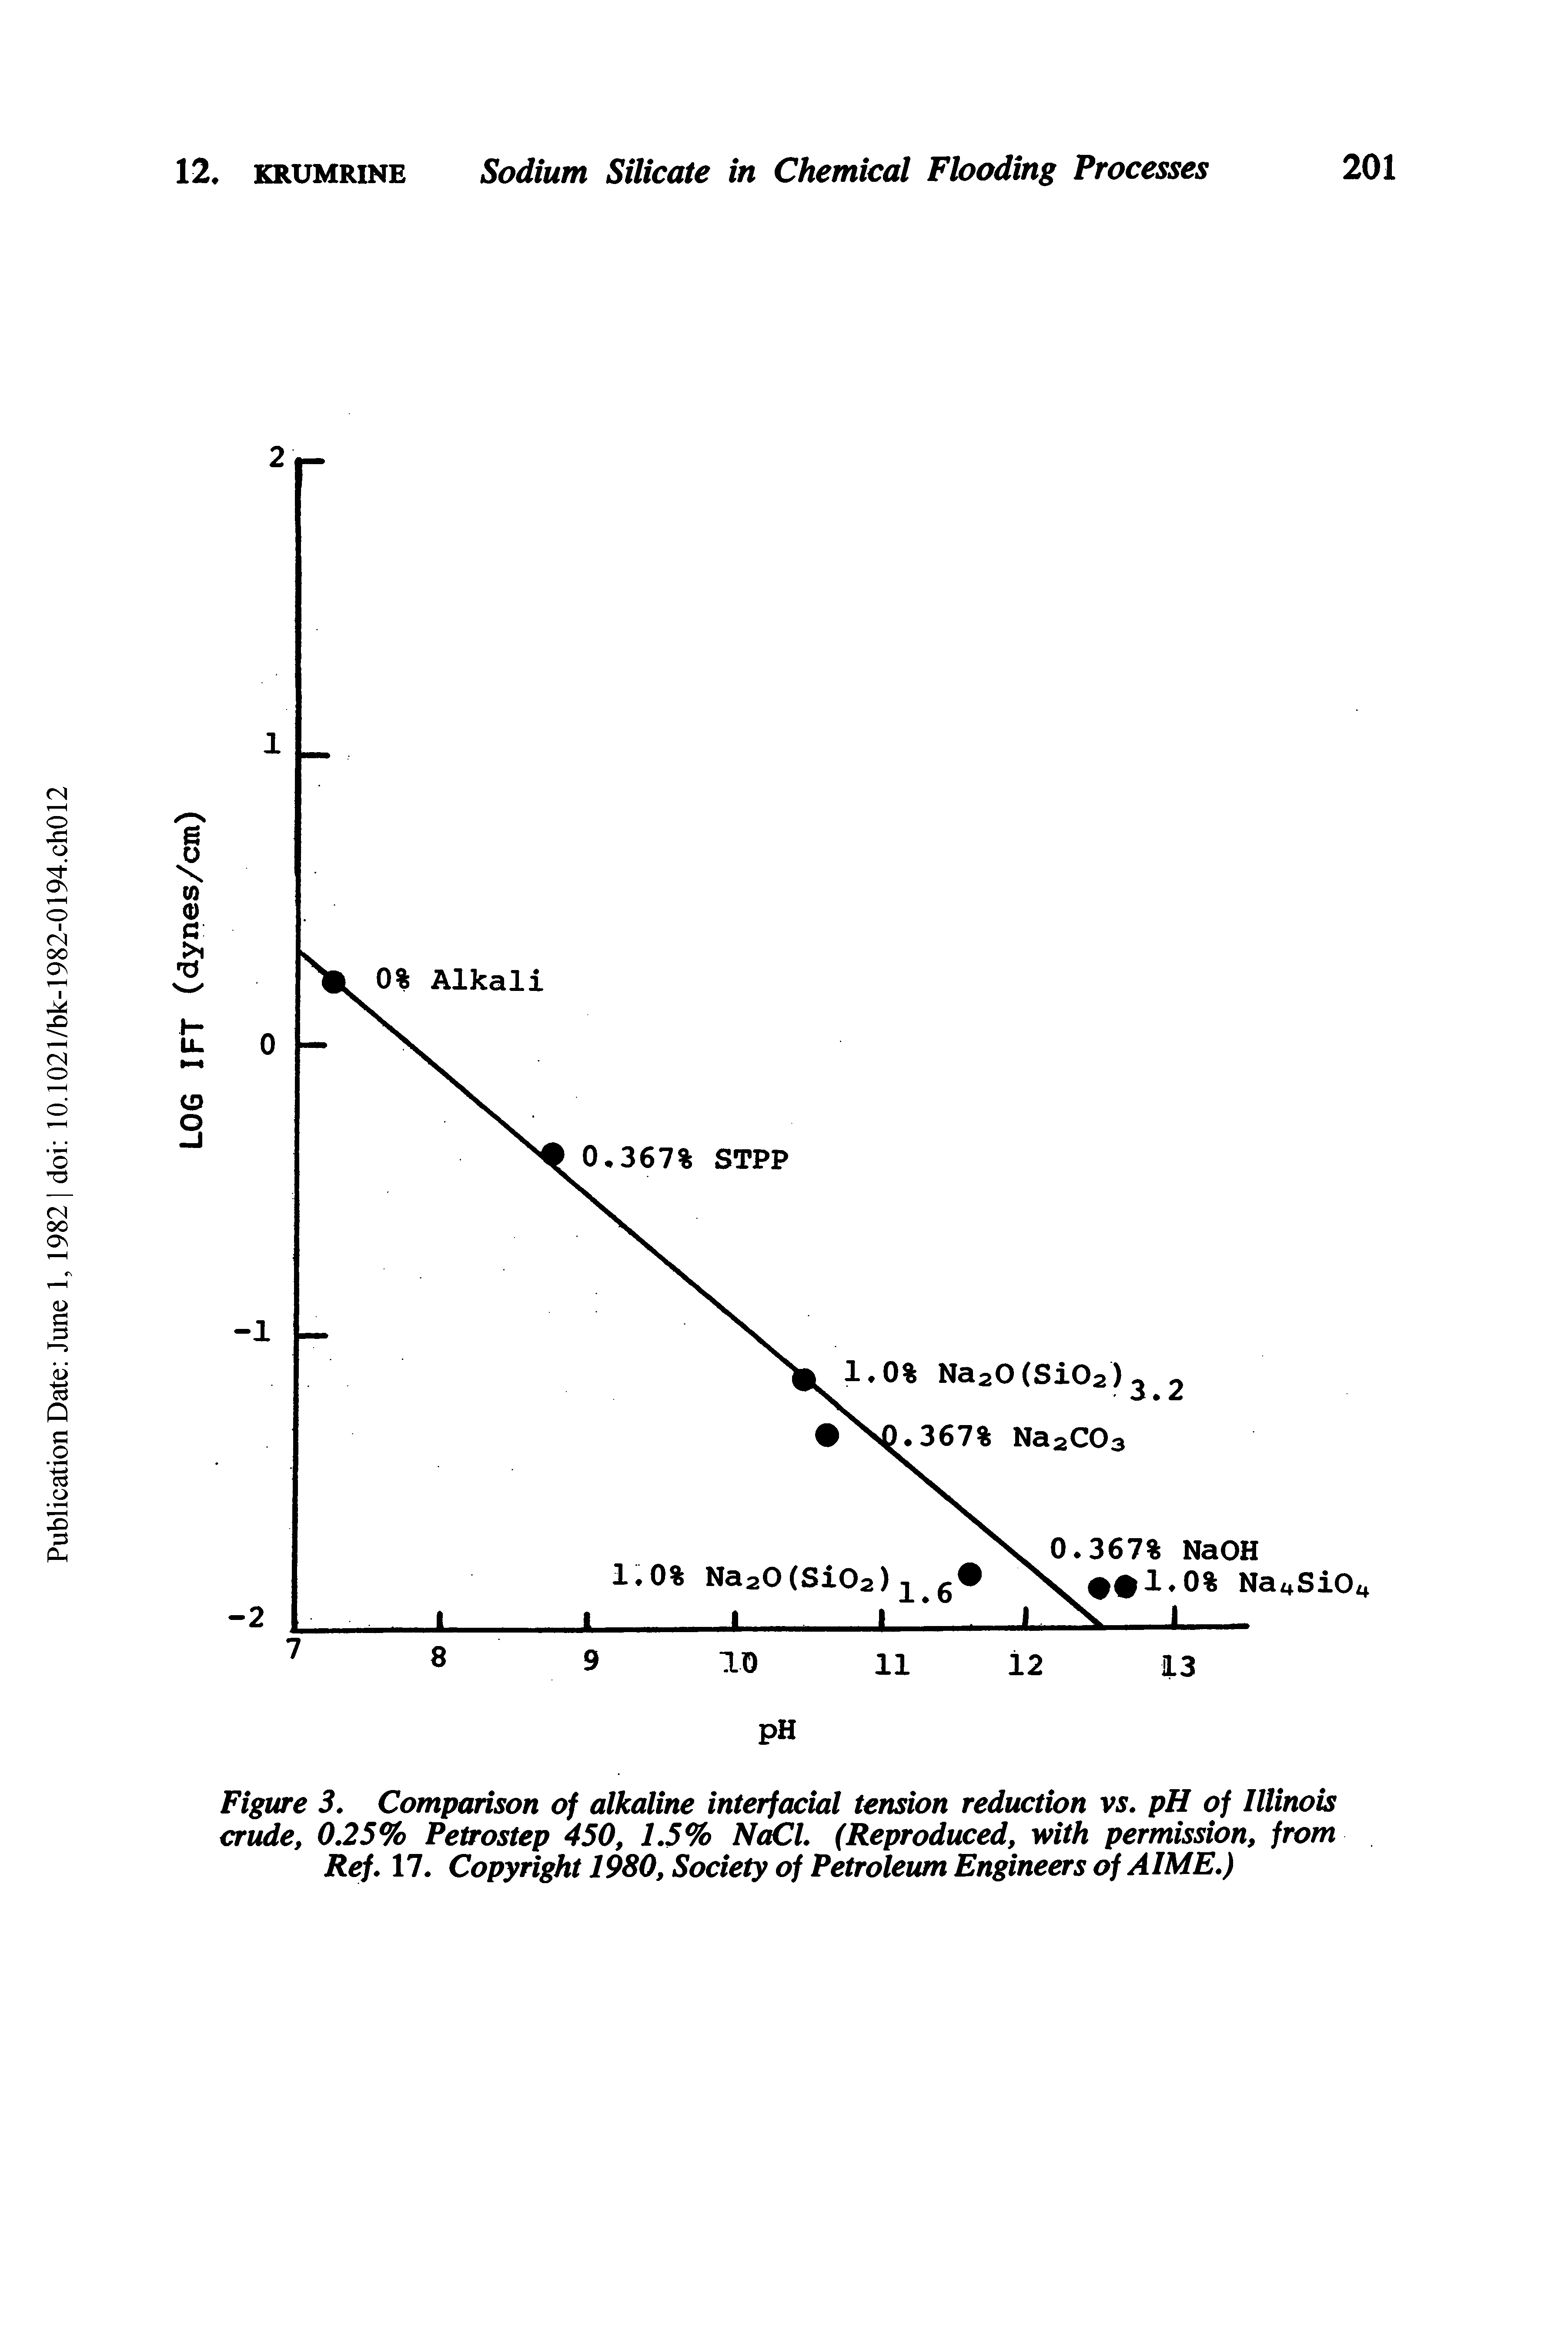 Figure 5. Comparison of alkaline interfacial tension reduction vs, pH of Illinois crude, 0.25% Petrostep 450, 1.5% N l. (Reproduced, with permission, from Ref. 17. Copyright 1980, Society of Petroleum Engineers of AIME.)...